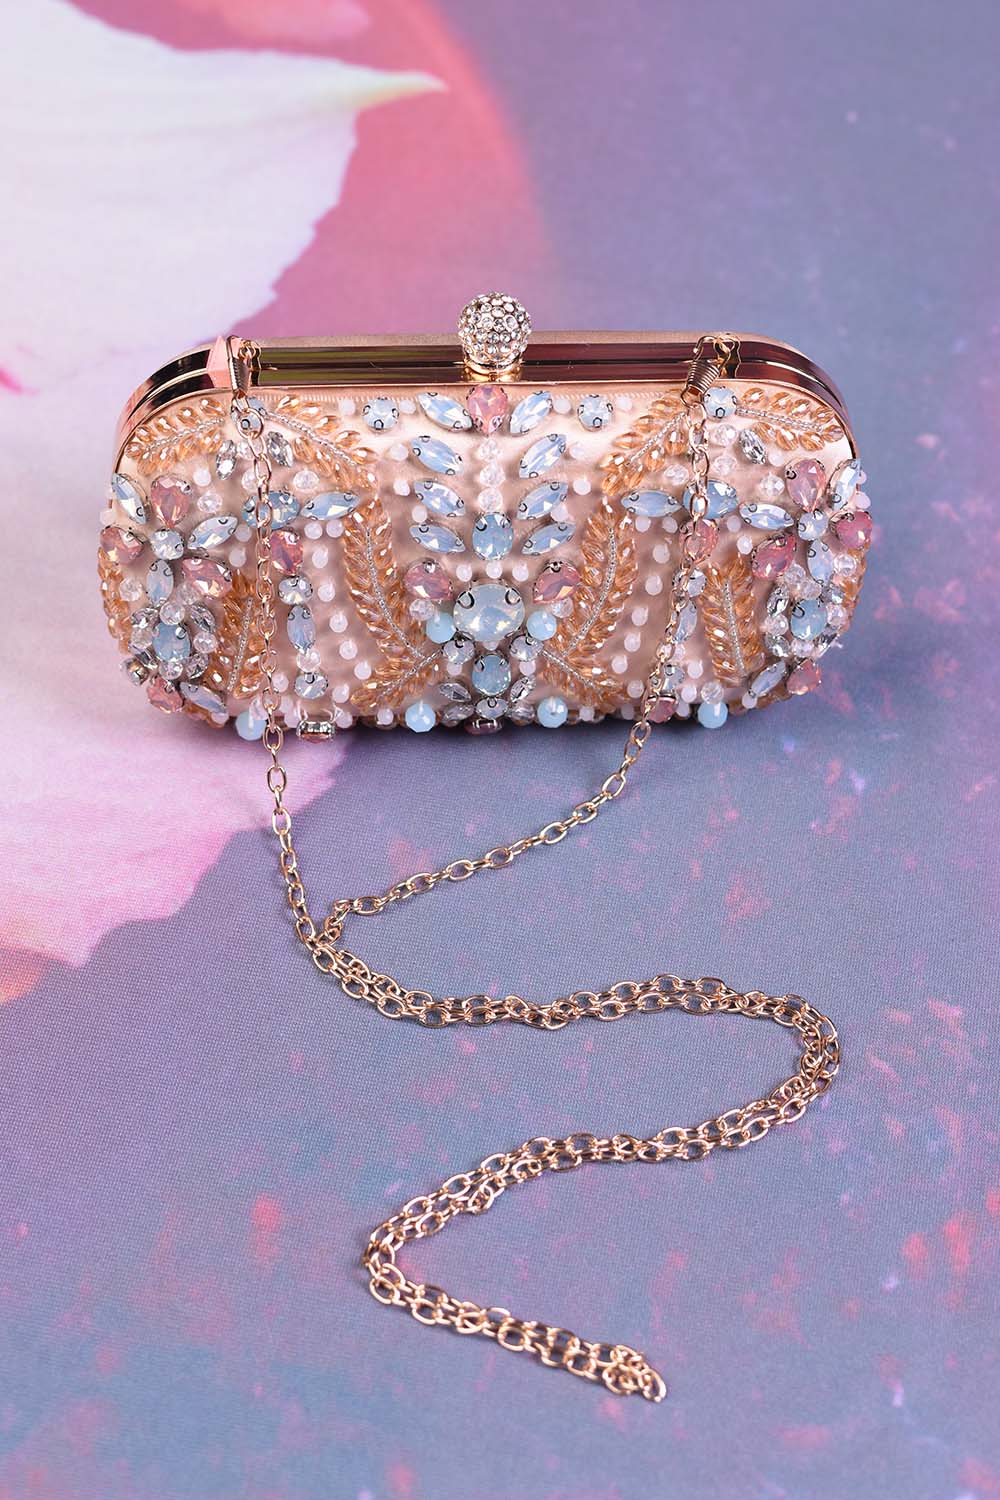 Top clasp of the Annah Stretton Champagne Lover clutch bag